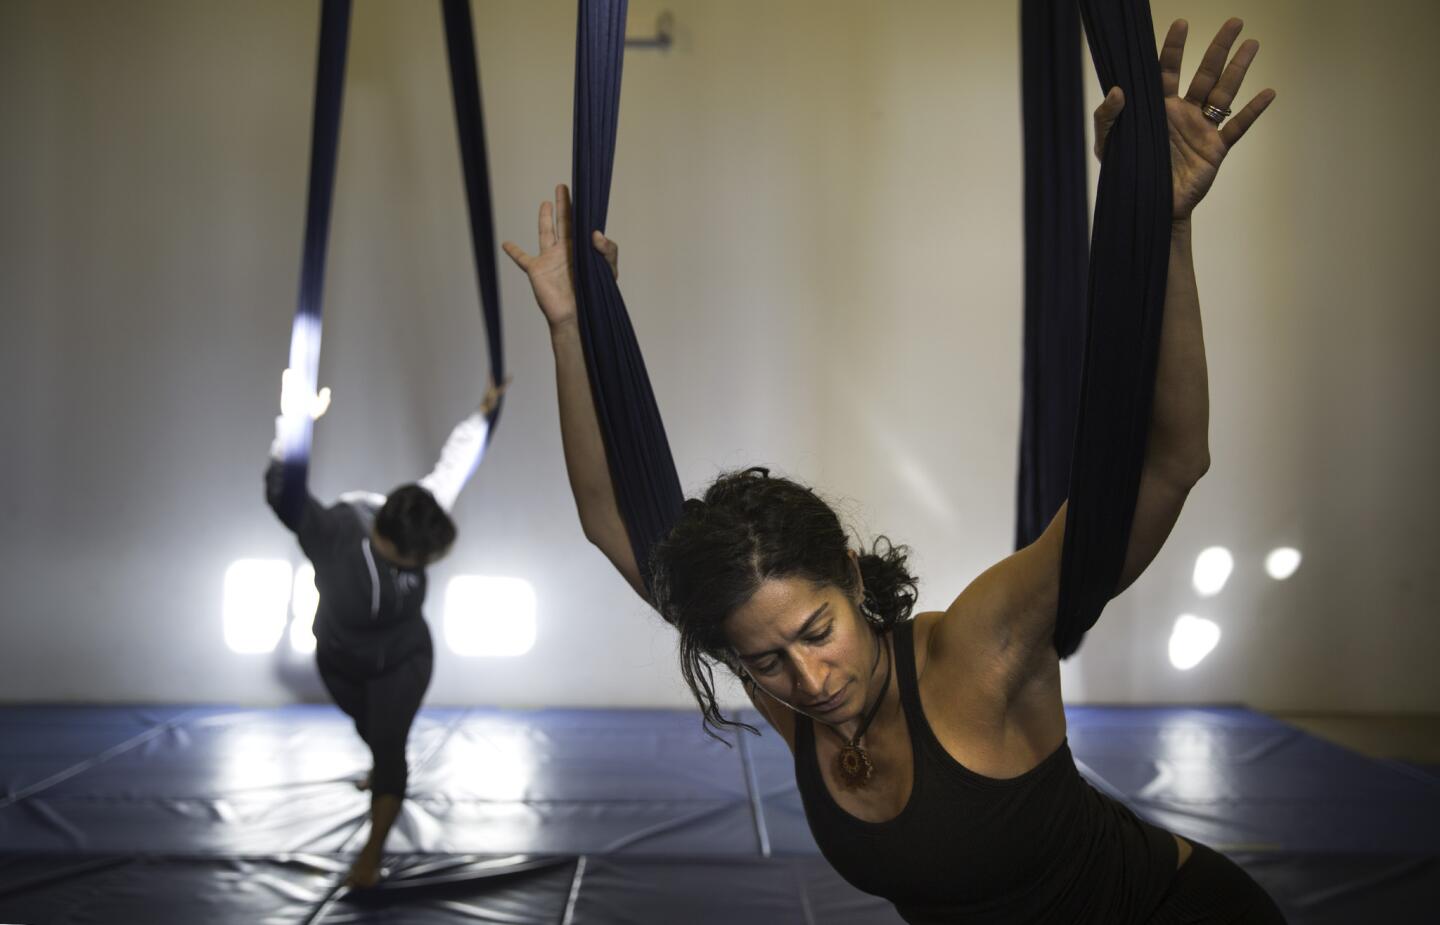 Instructor Veronica DeSoyza, right, leads a morning aerial yoga class at Kinship in Highland Park. Shelby Williams-Gonzalez, left, holds a pose.